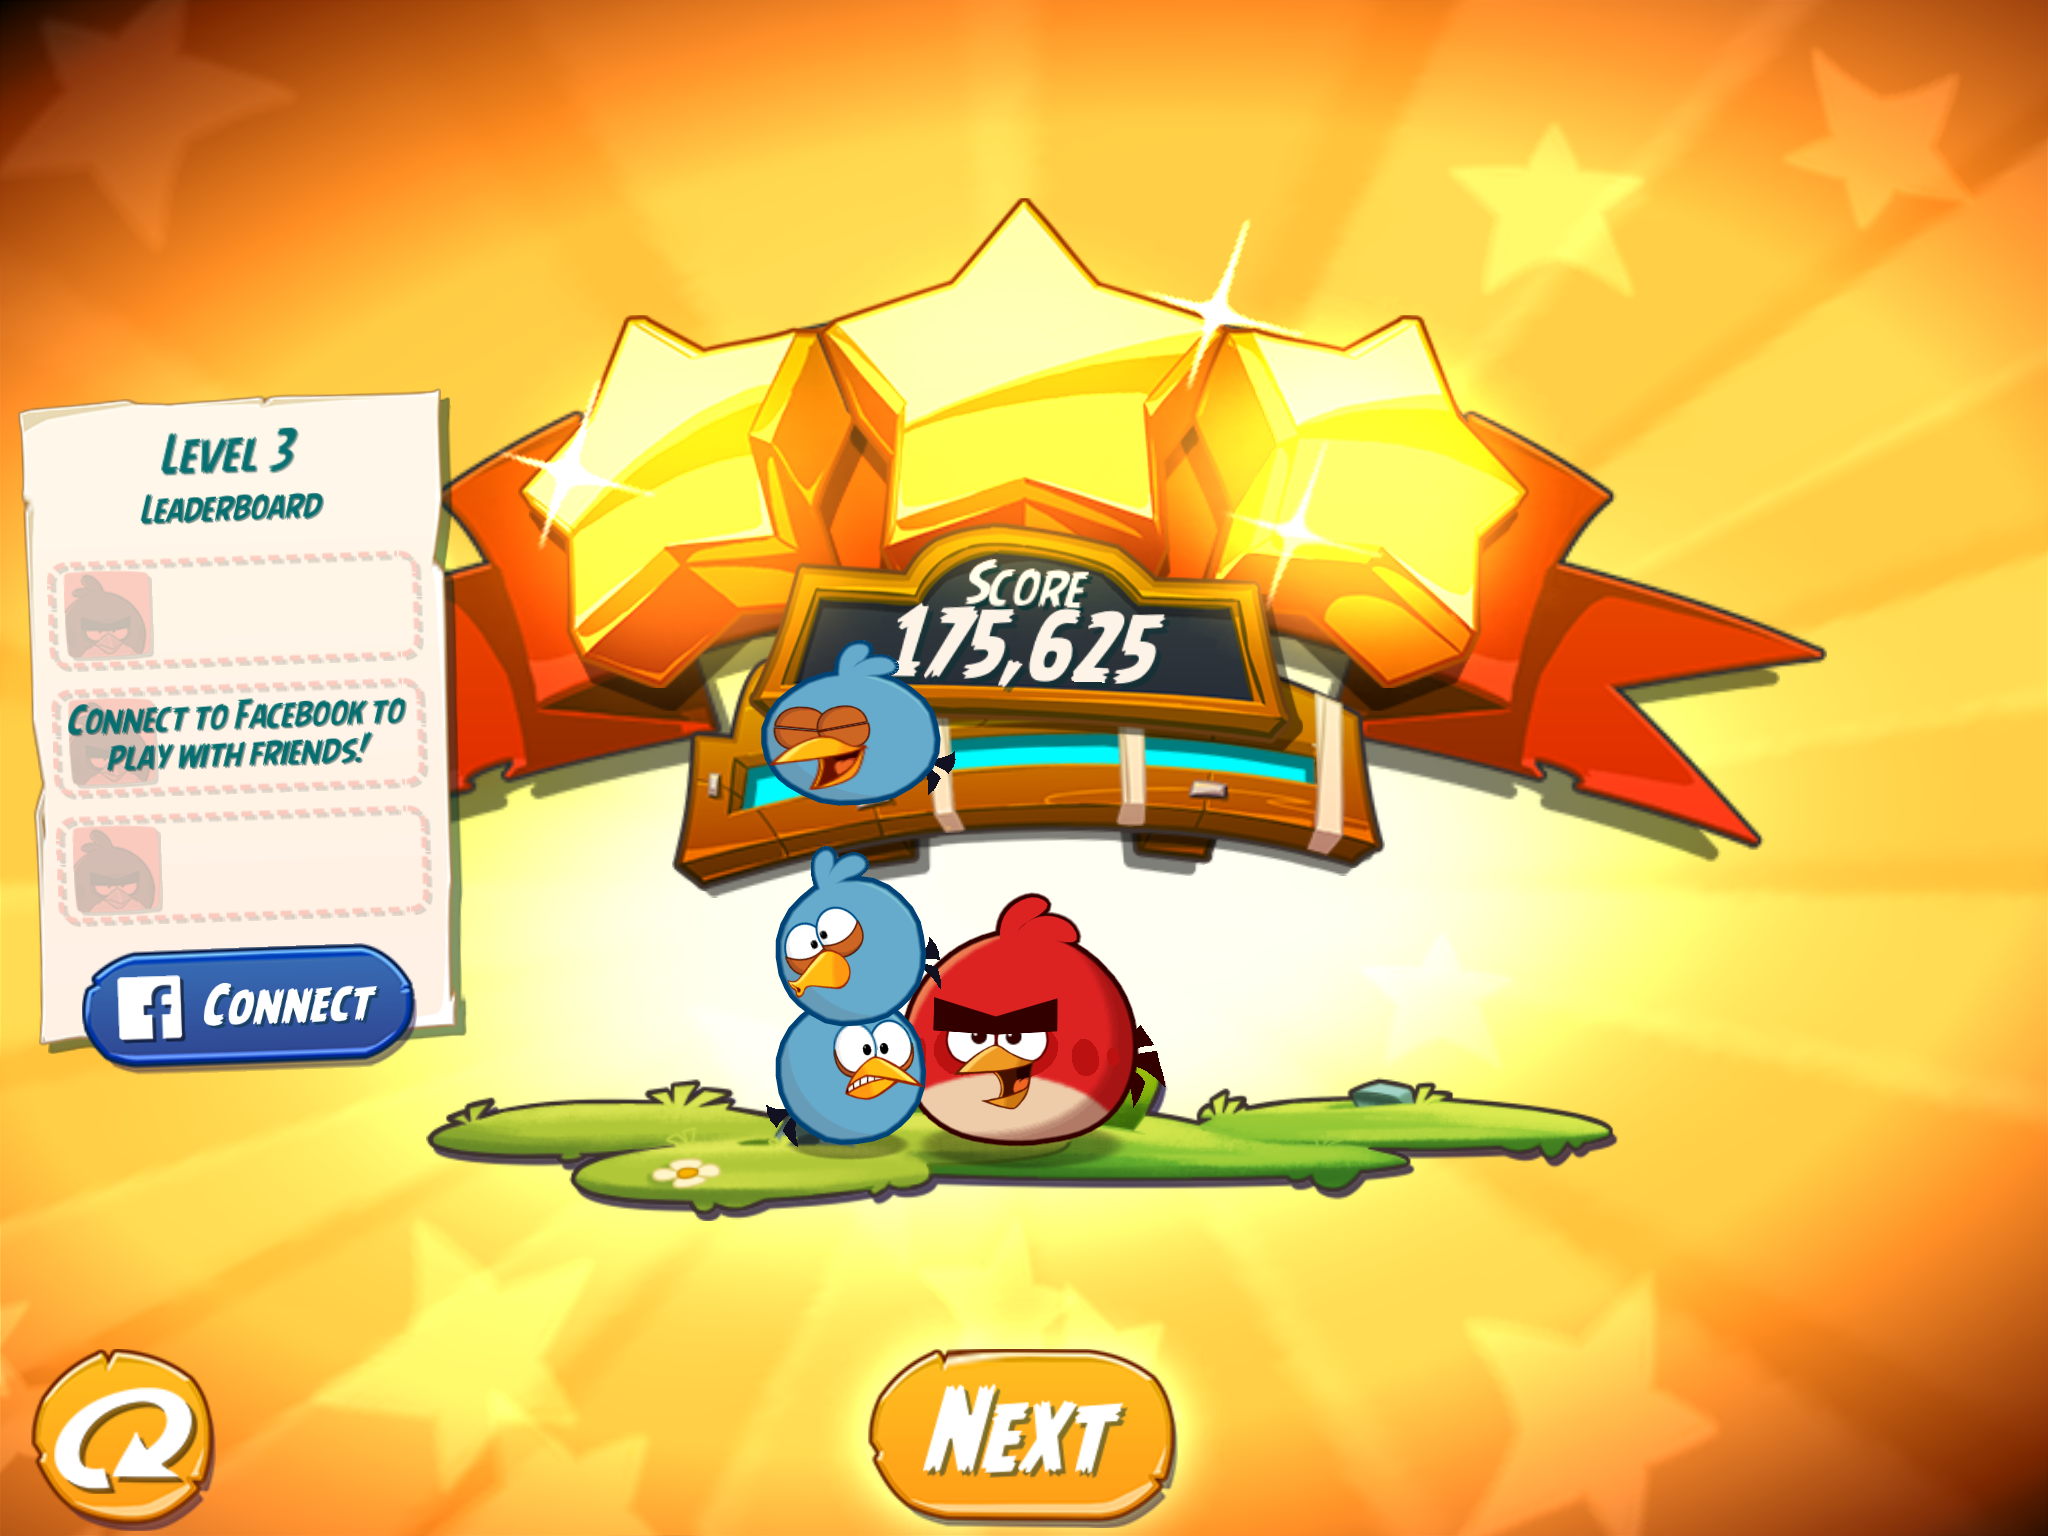 Spindy12: Angry Birds 2: Level 3 (iOS) 175,625 points on 2016-12-20 15:05:17